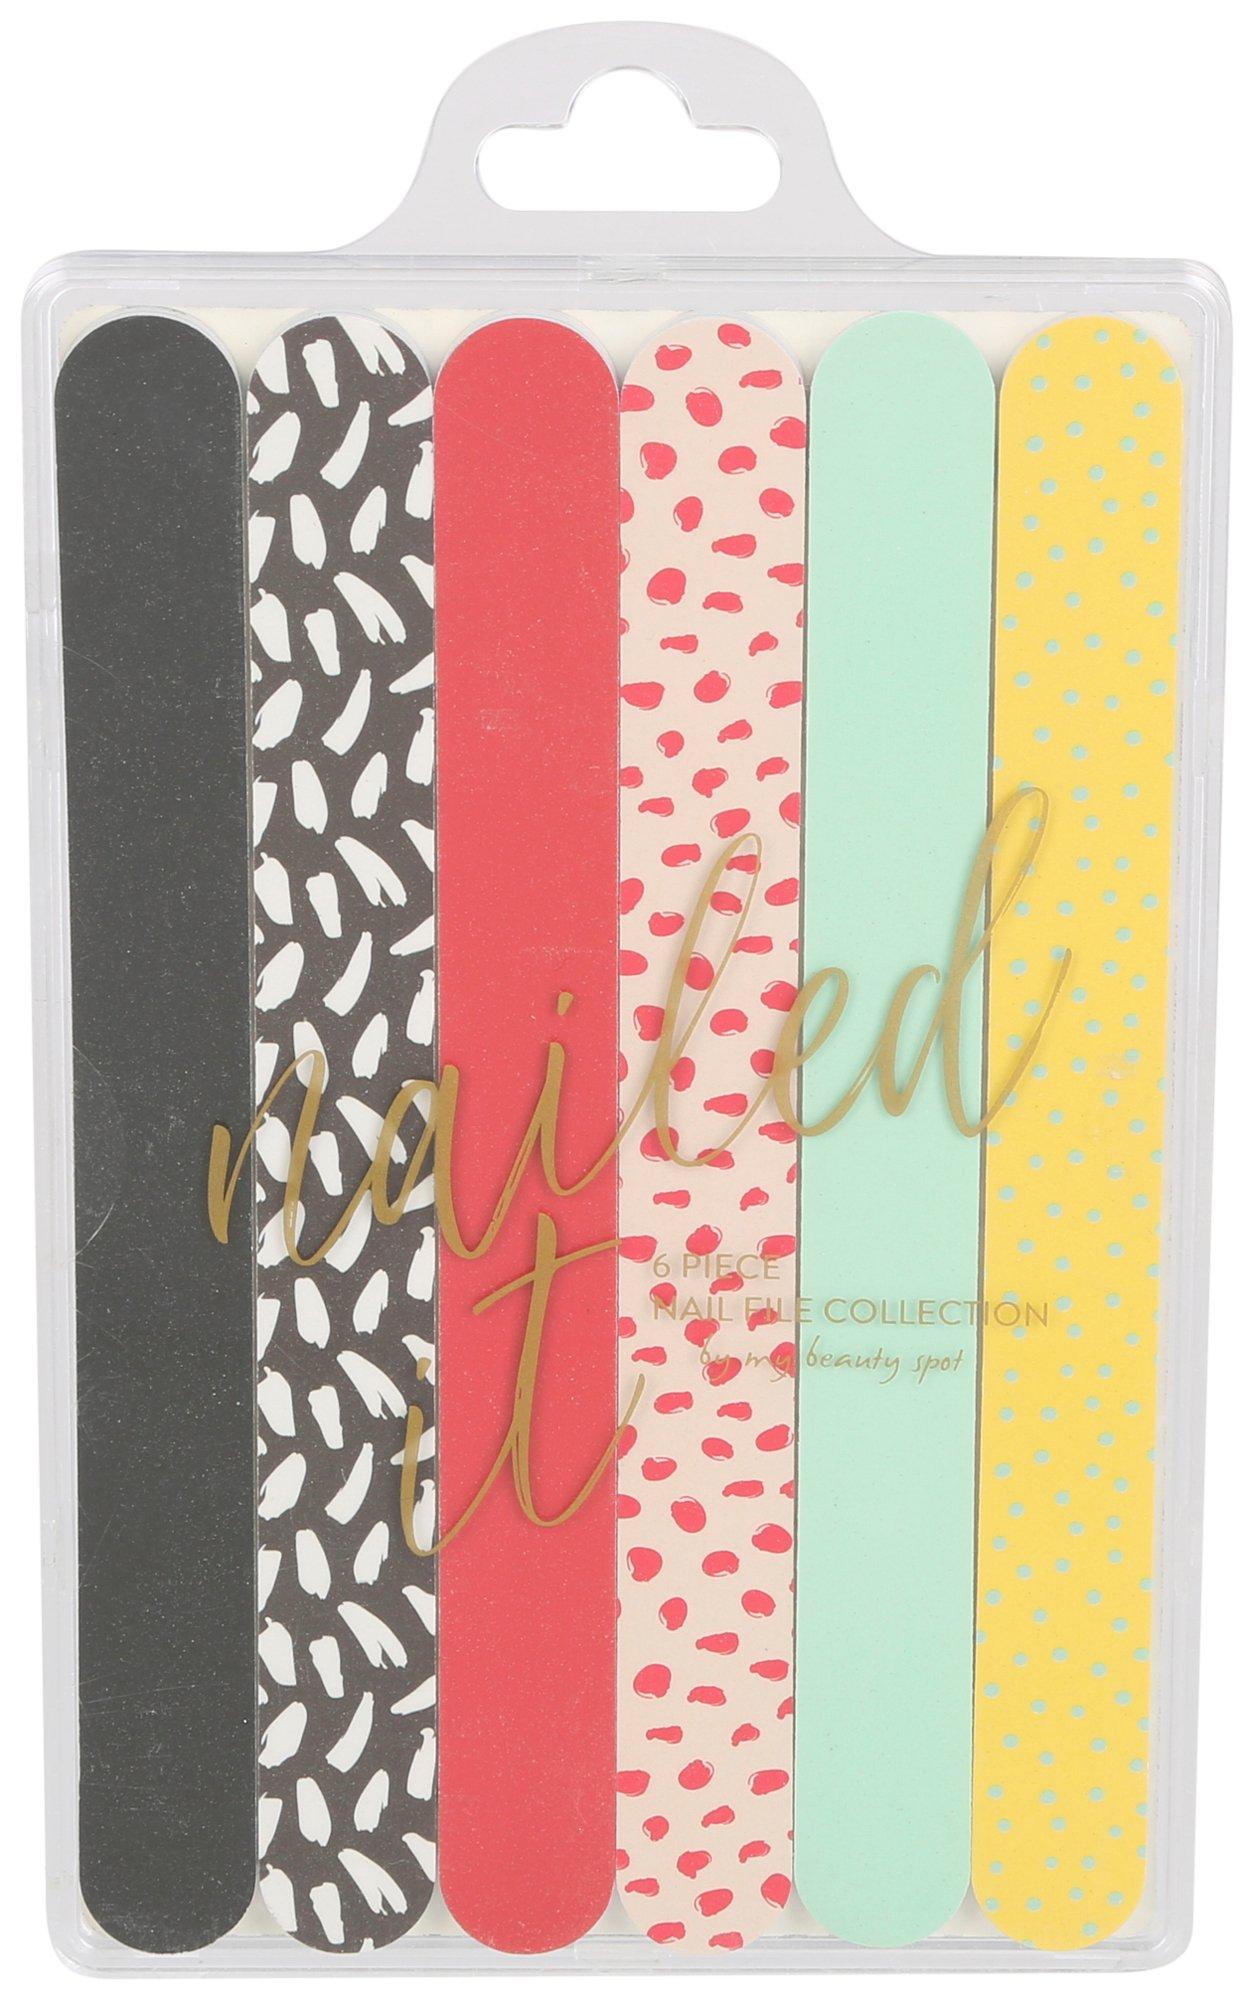 My Beauty Spot 6-Pc. Nail File Collection